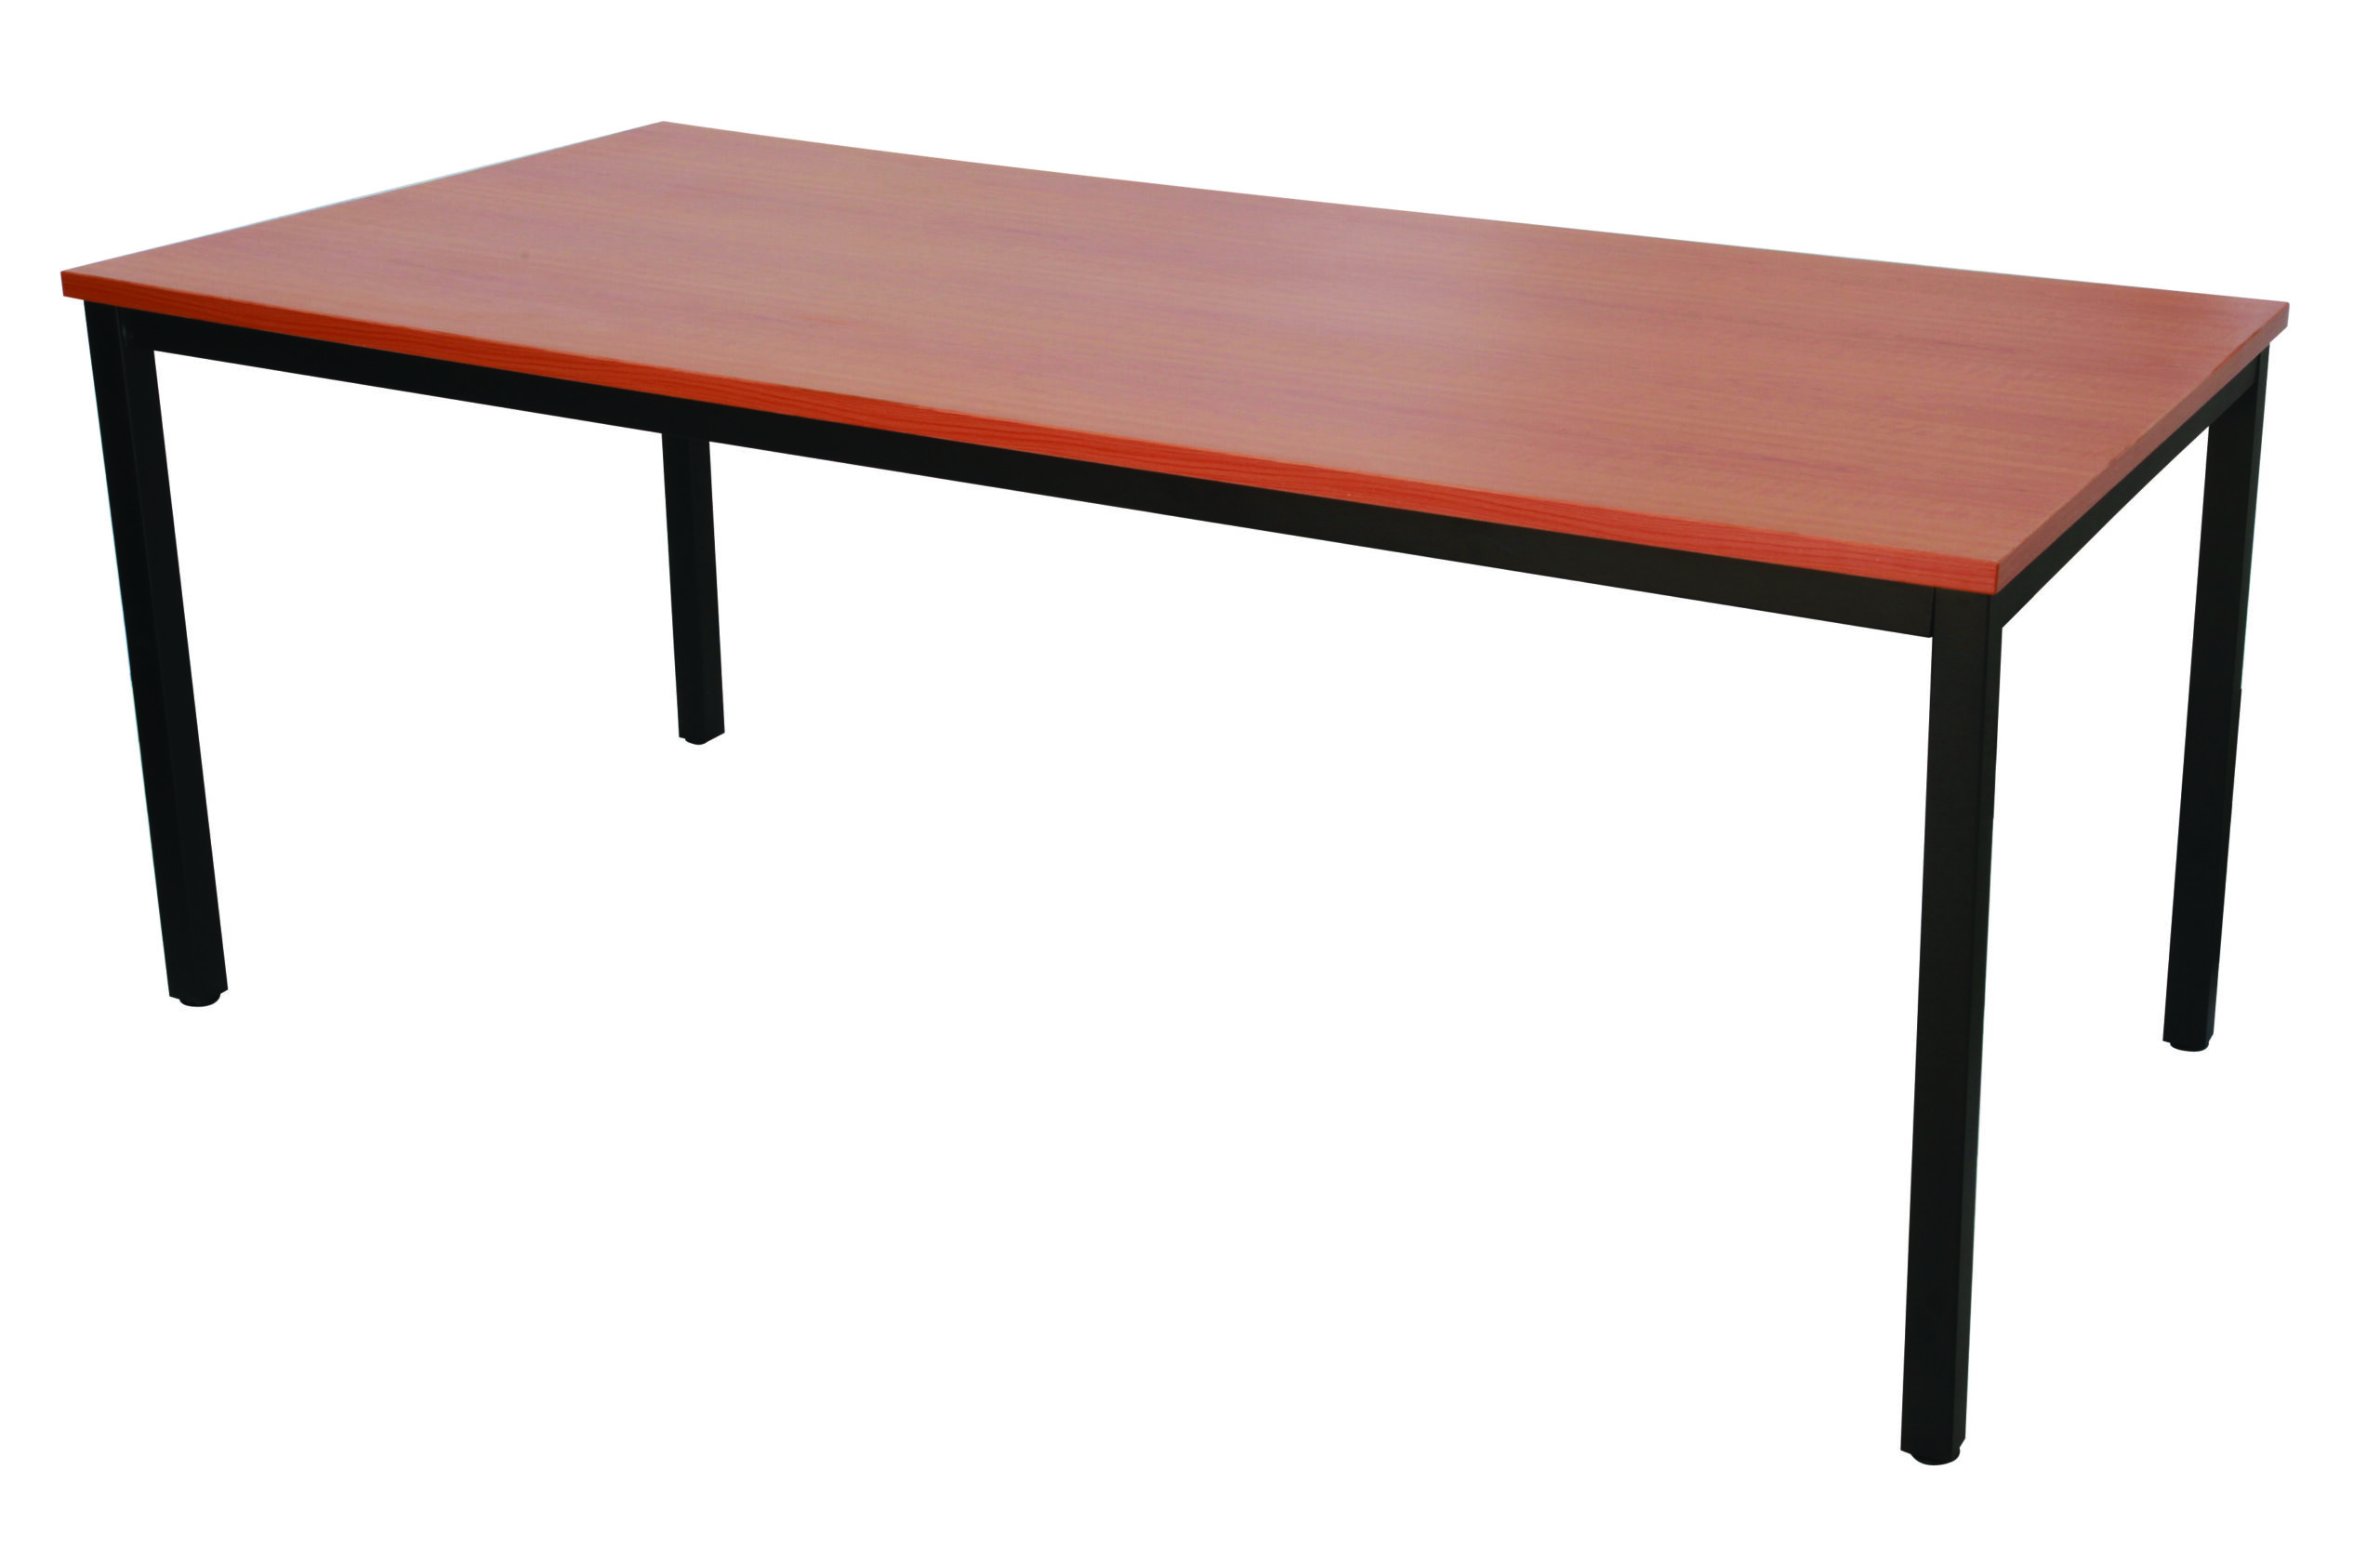 Steel Frame Table (1200W x 730H x 600D)